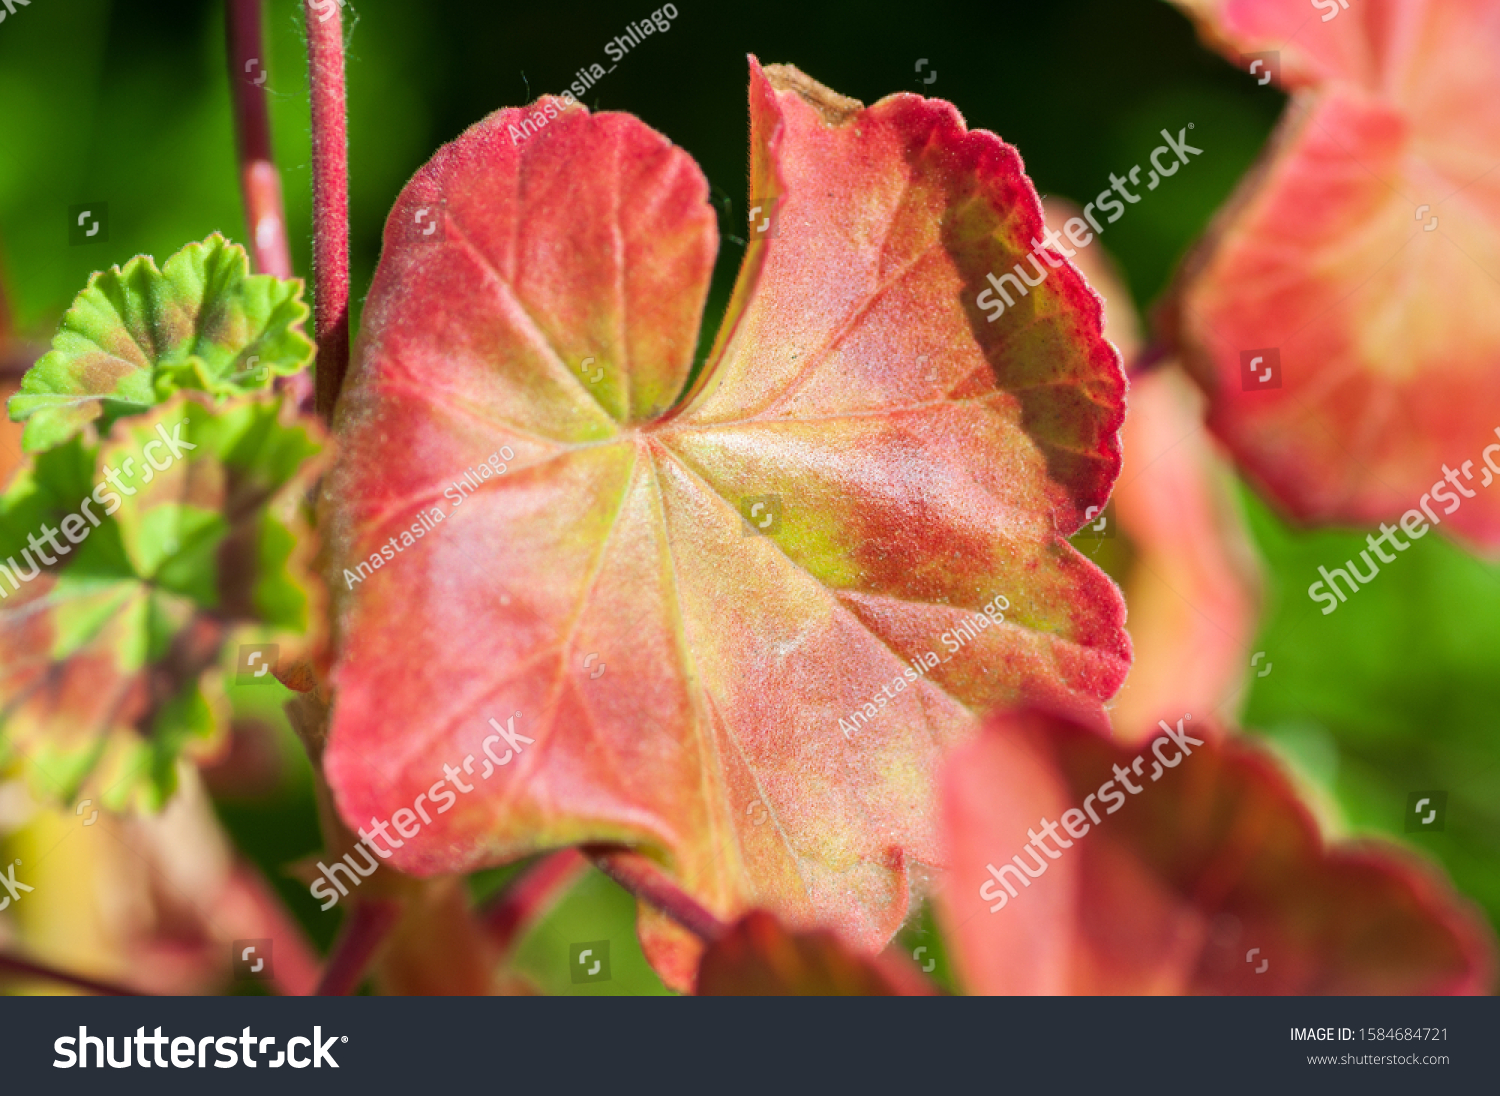 The colored leaf of Pelargonium in close-up. A Geranium-like an evergreen plant. #1584684721